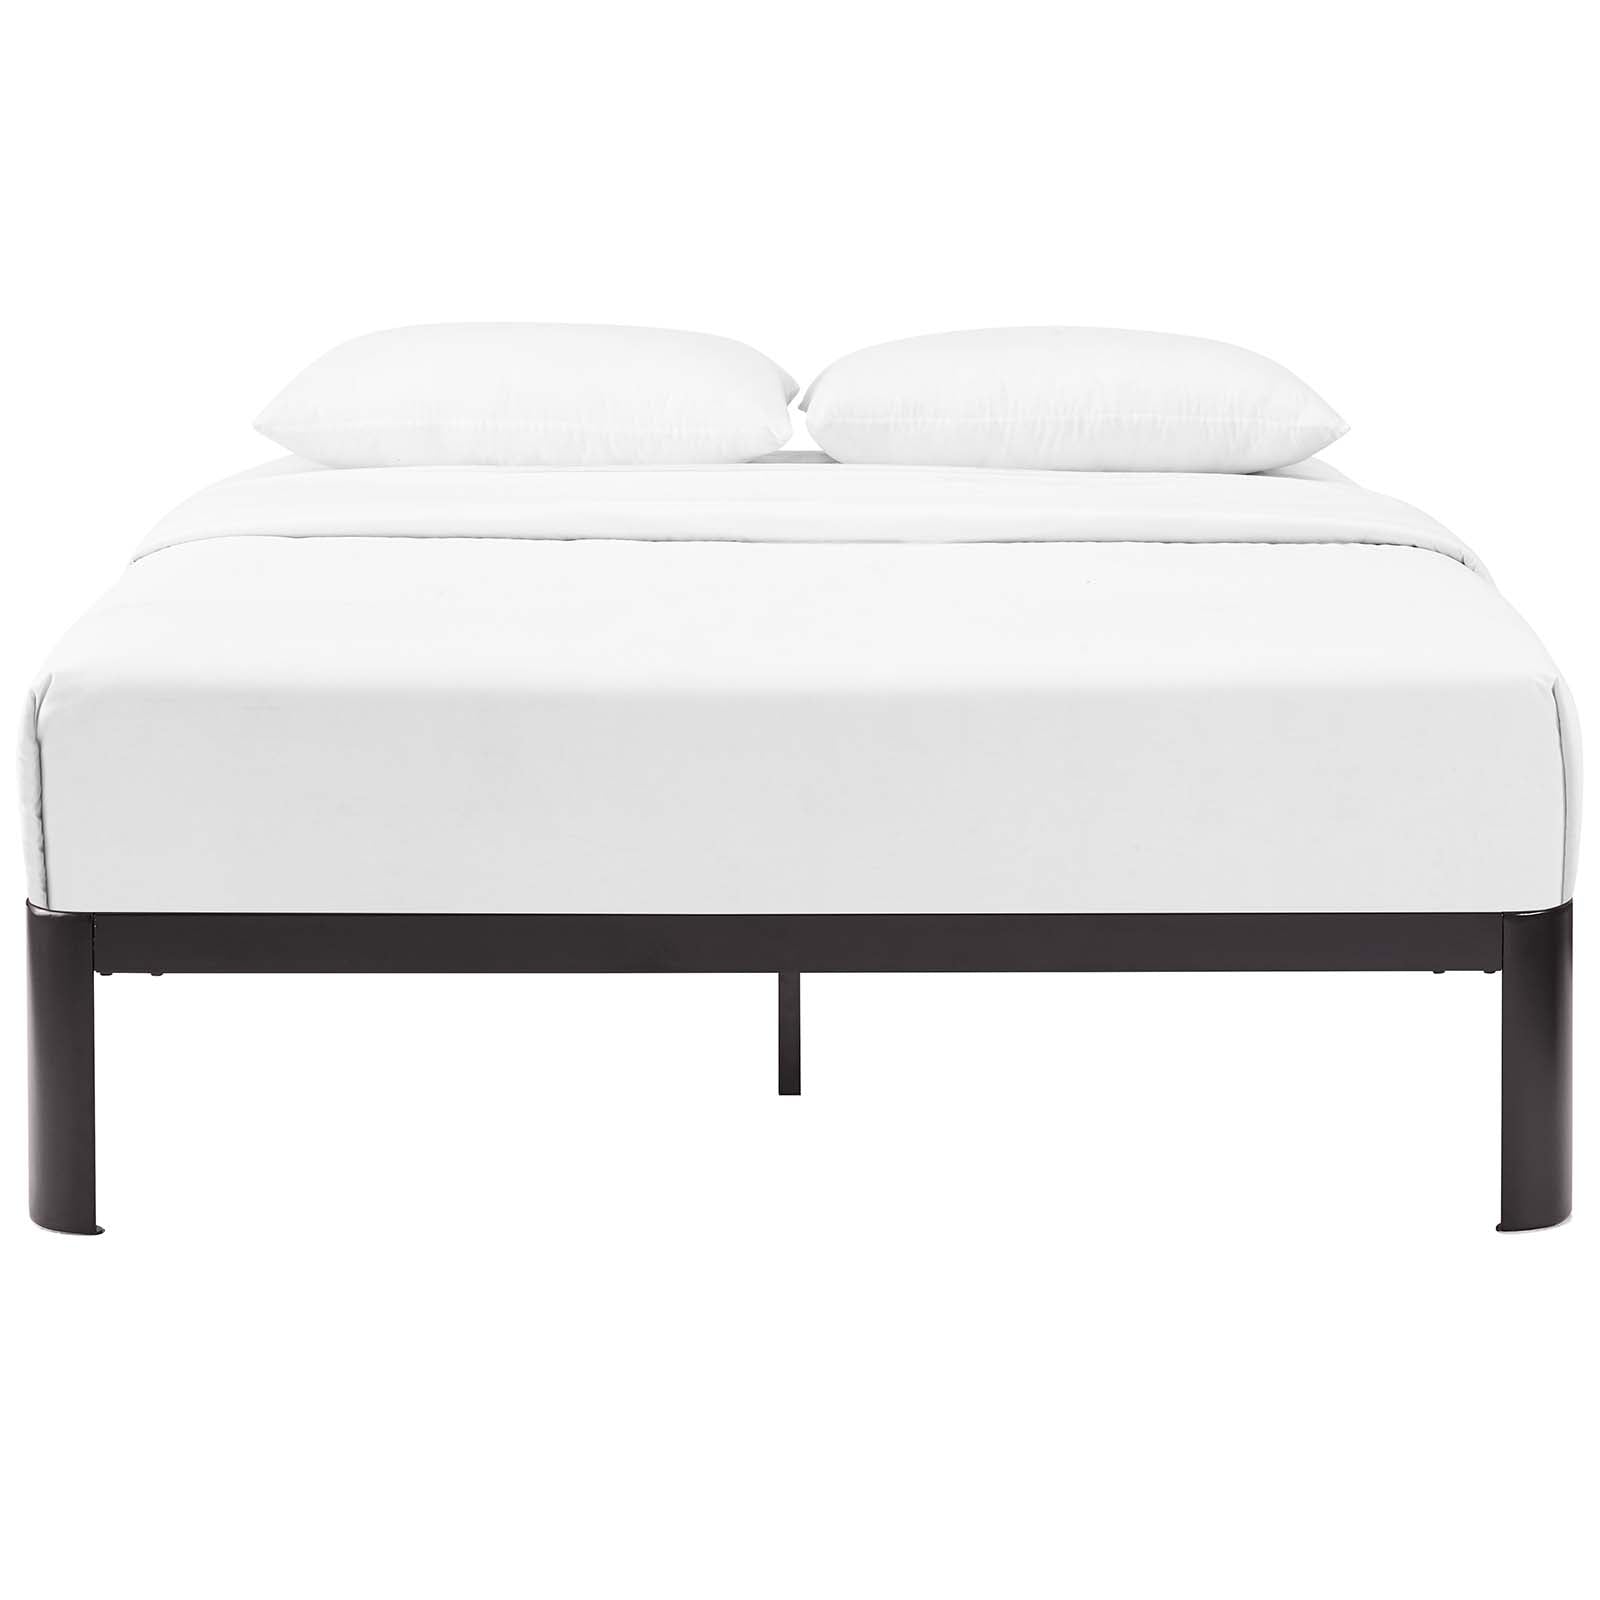 Modway Beds - Corinne Queen Bed Frame Brown